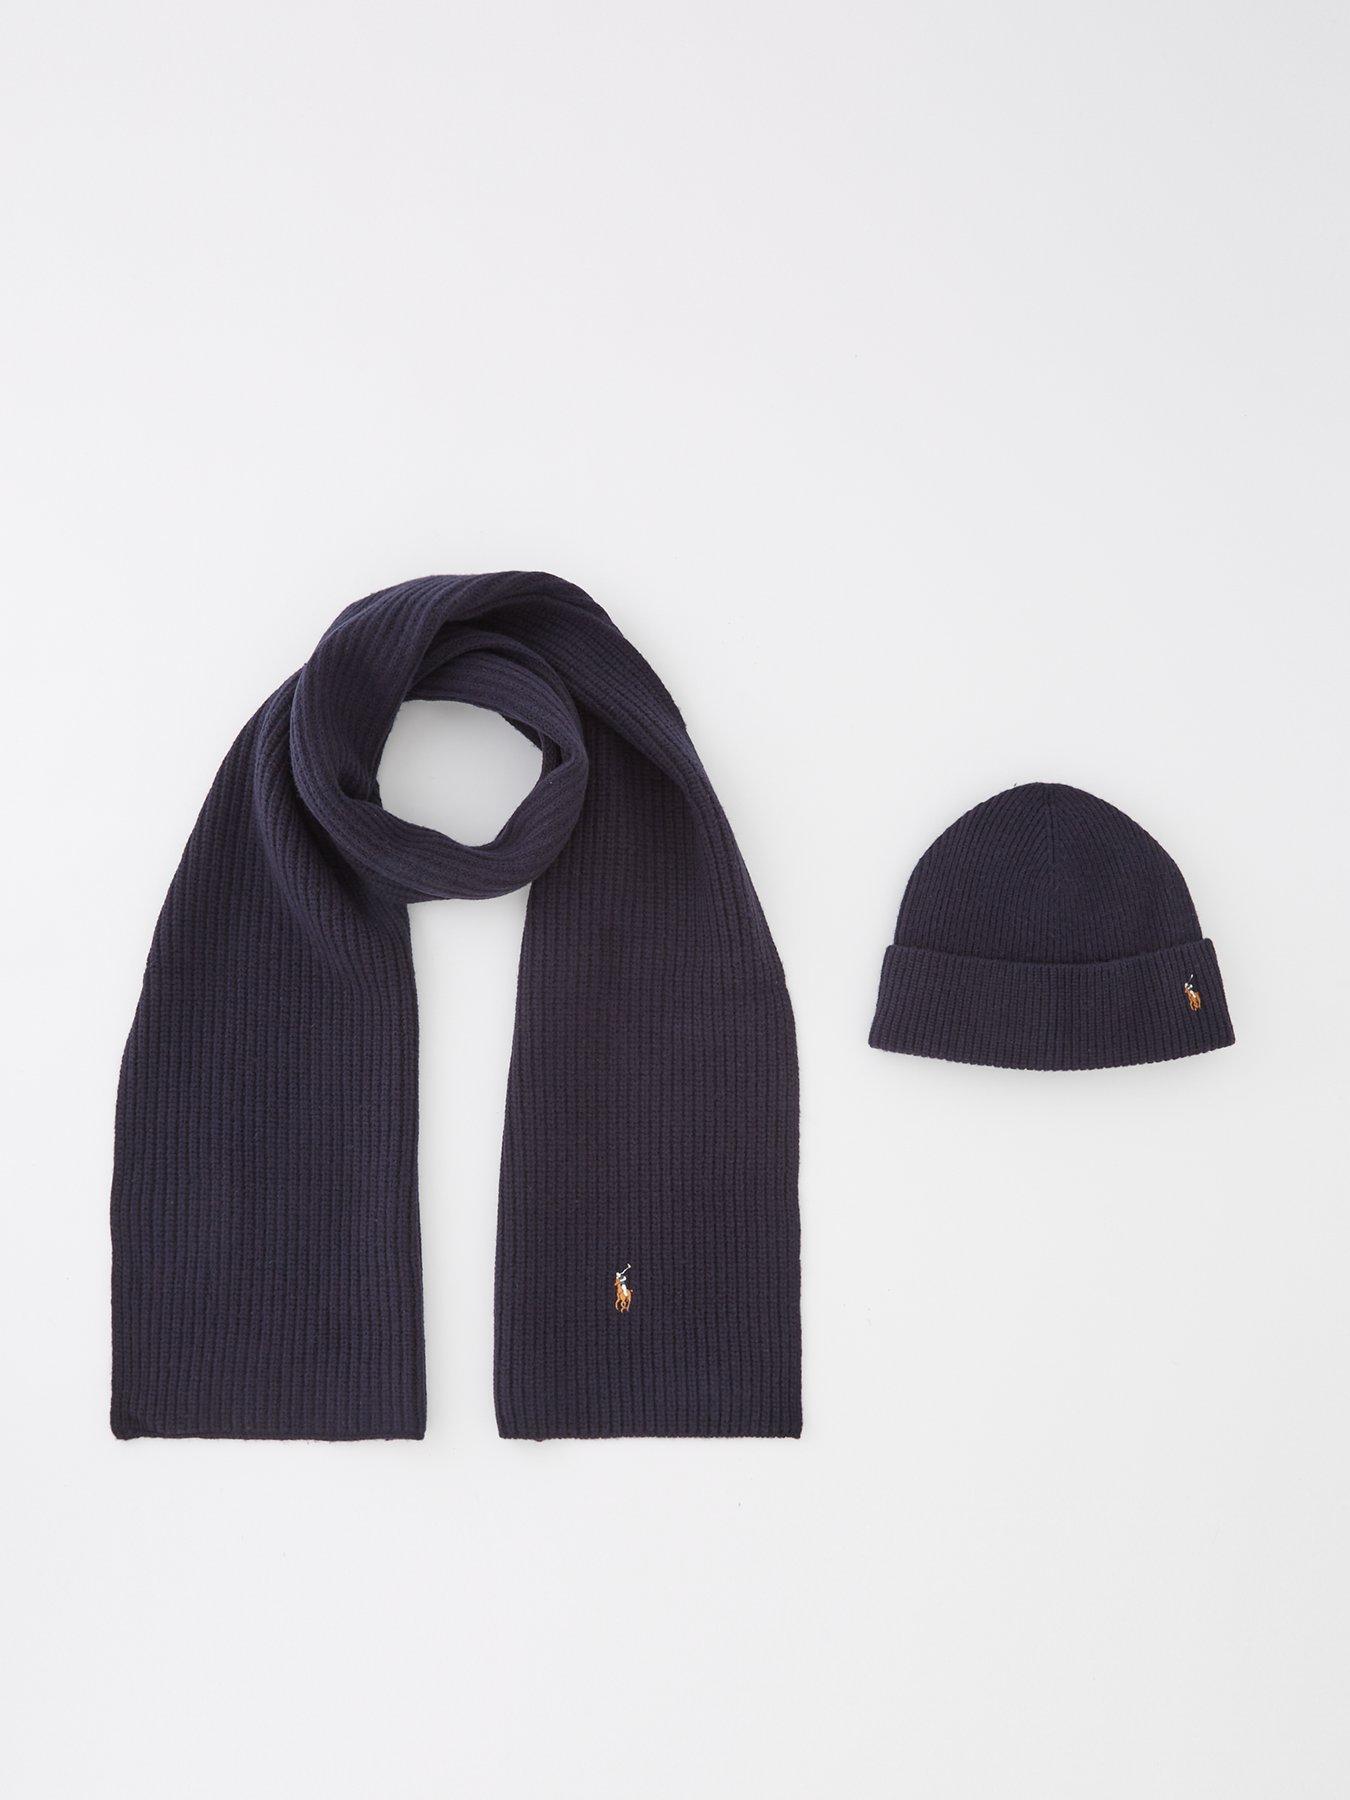 Polo Ralph Lauren Signature Rib Knitted Scarf & Knitted Beanie Hat Gift Set  